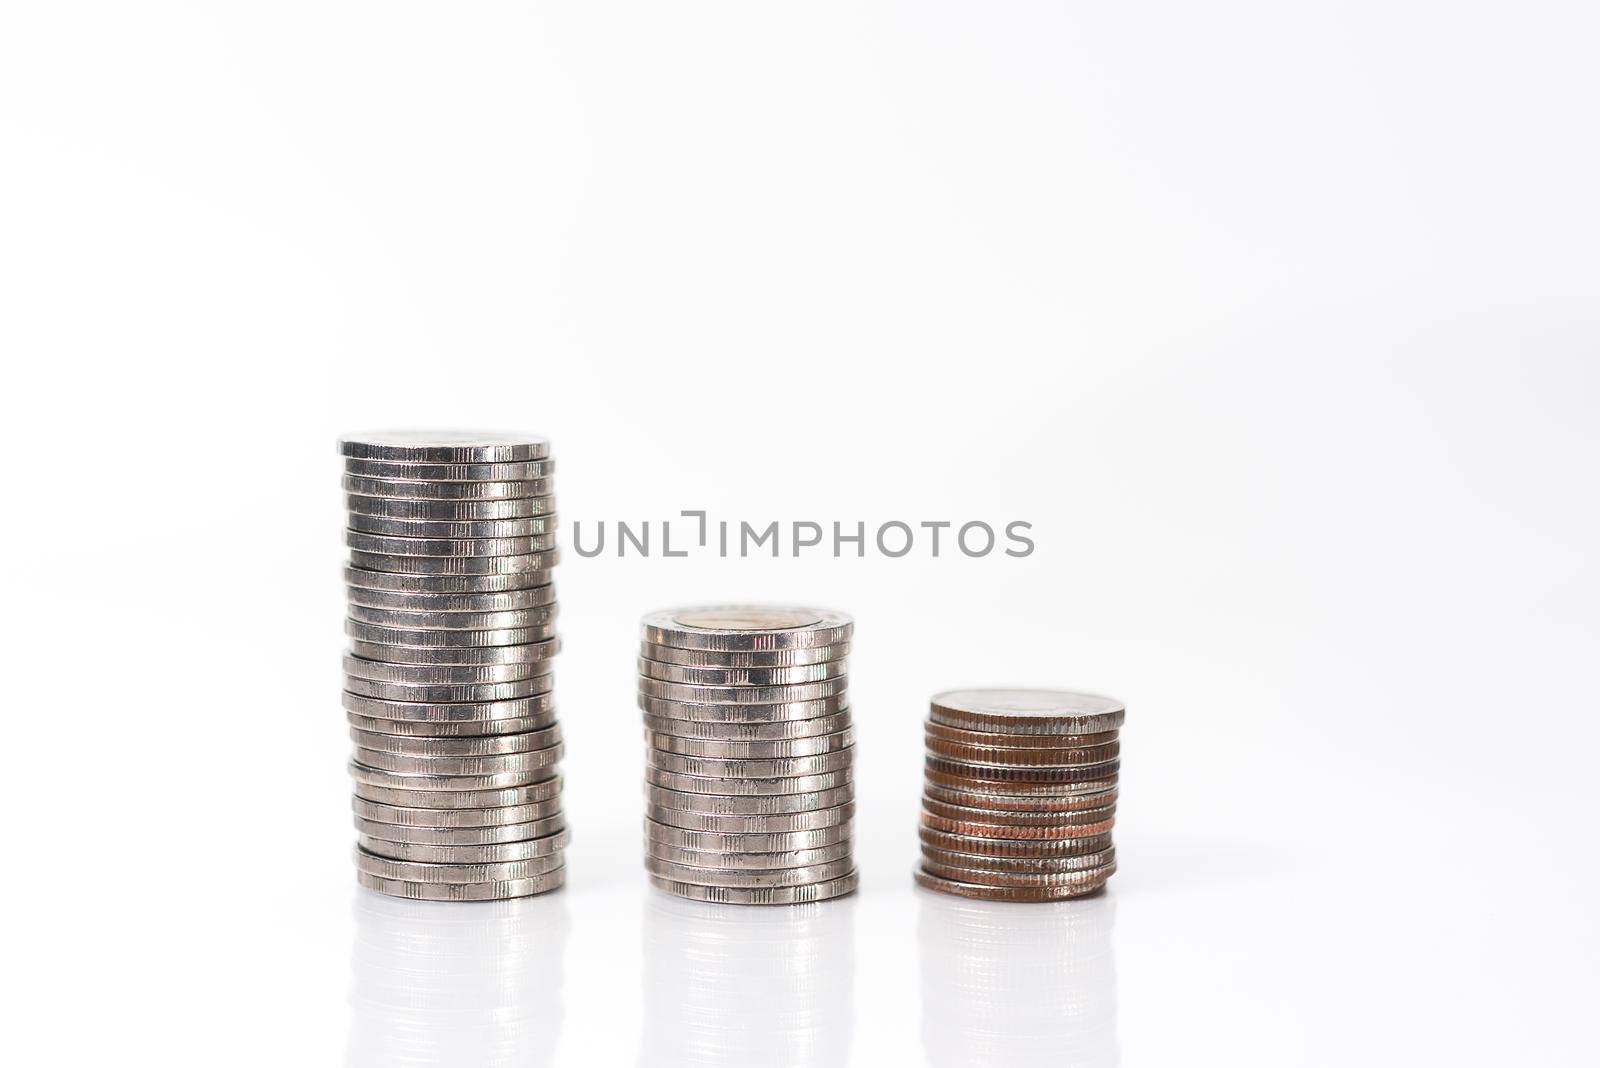 Coin stacks on a white background